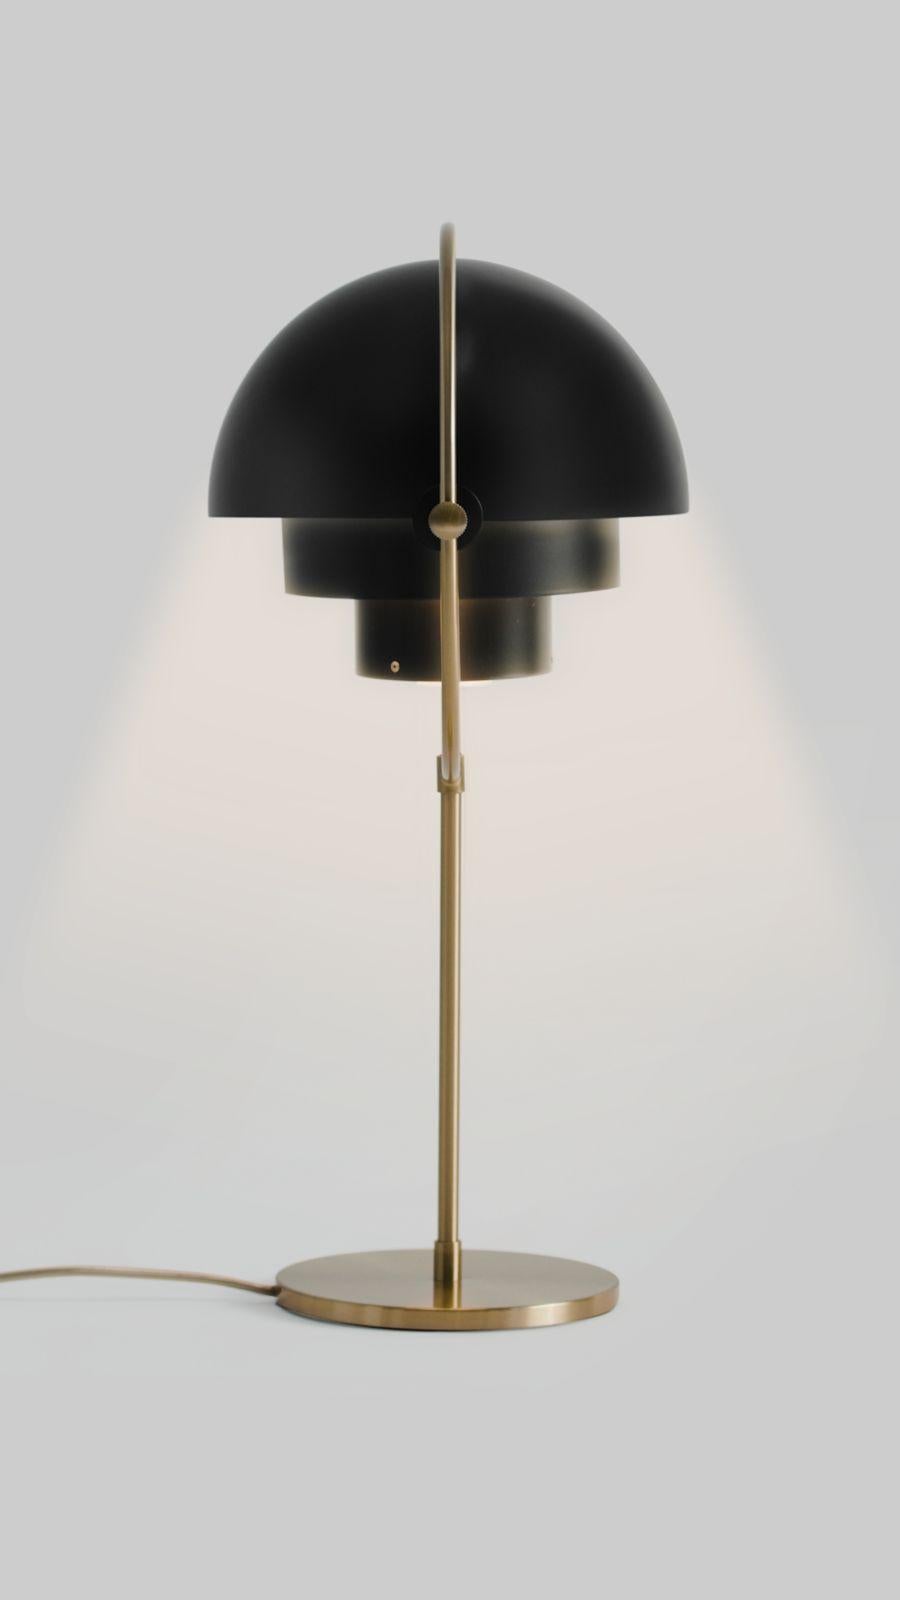 Louis Weisdorf 'Multi-Lite' table lamp in black and brass. Designed in 1972 by Weisdorf, this is a newly produced authorized re-edition by GUBI of Denmark who meticulously reproduce his work with scrupulous attention to detail and materials that are